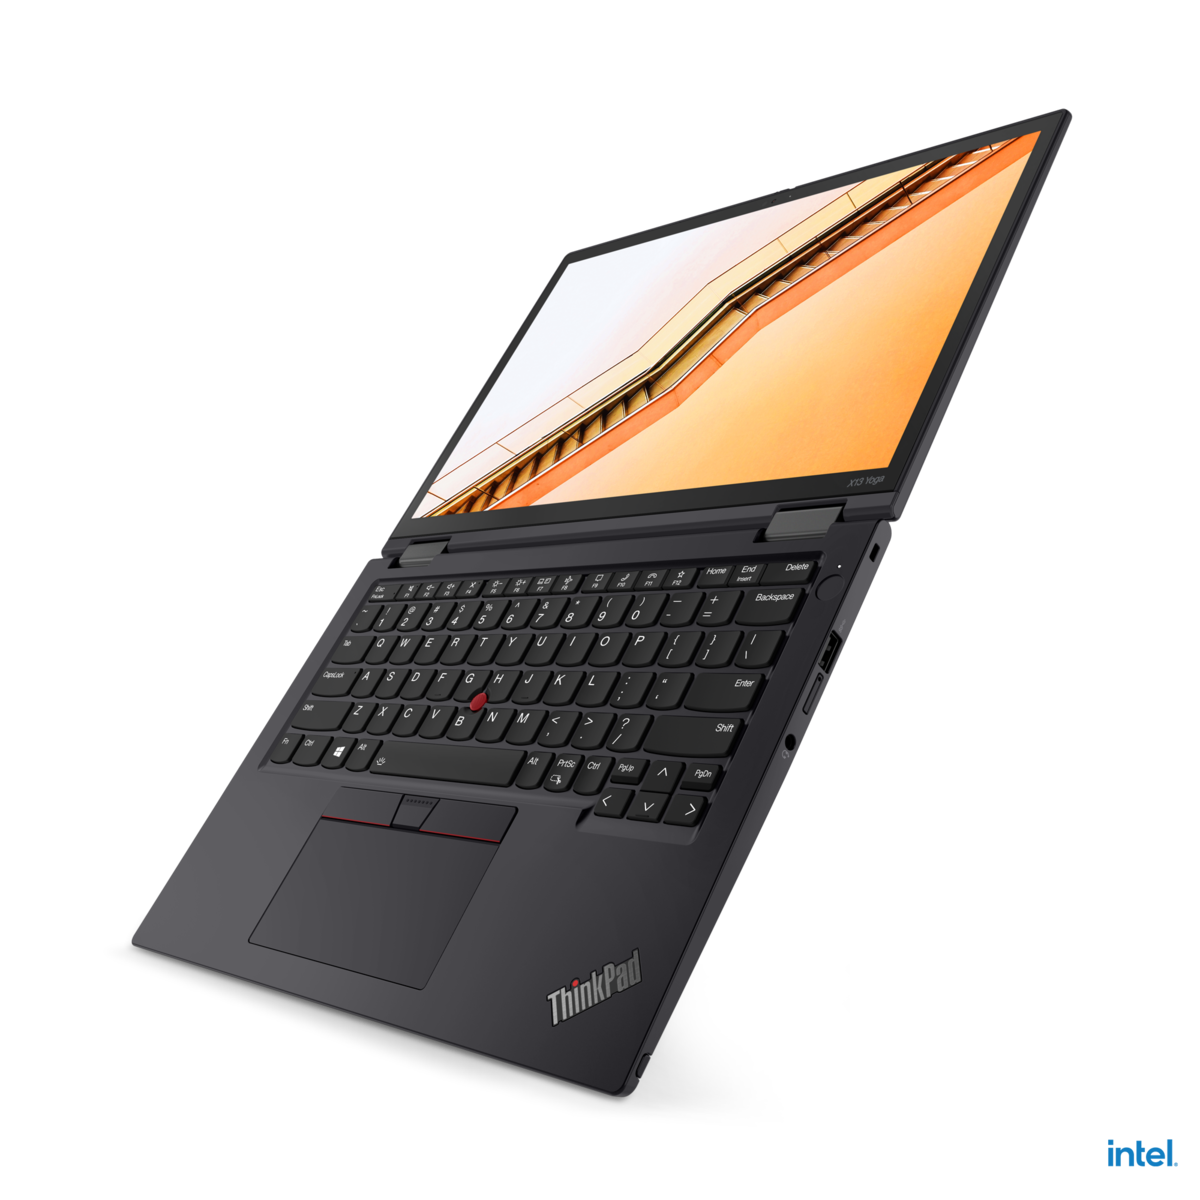 Lenovo launches the ThinkPad X13 Yoga Gen 2 with Tiger Lake vPro 